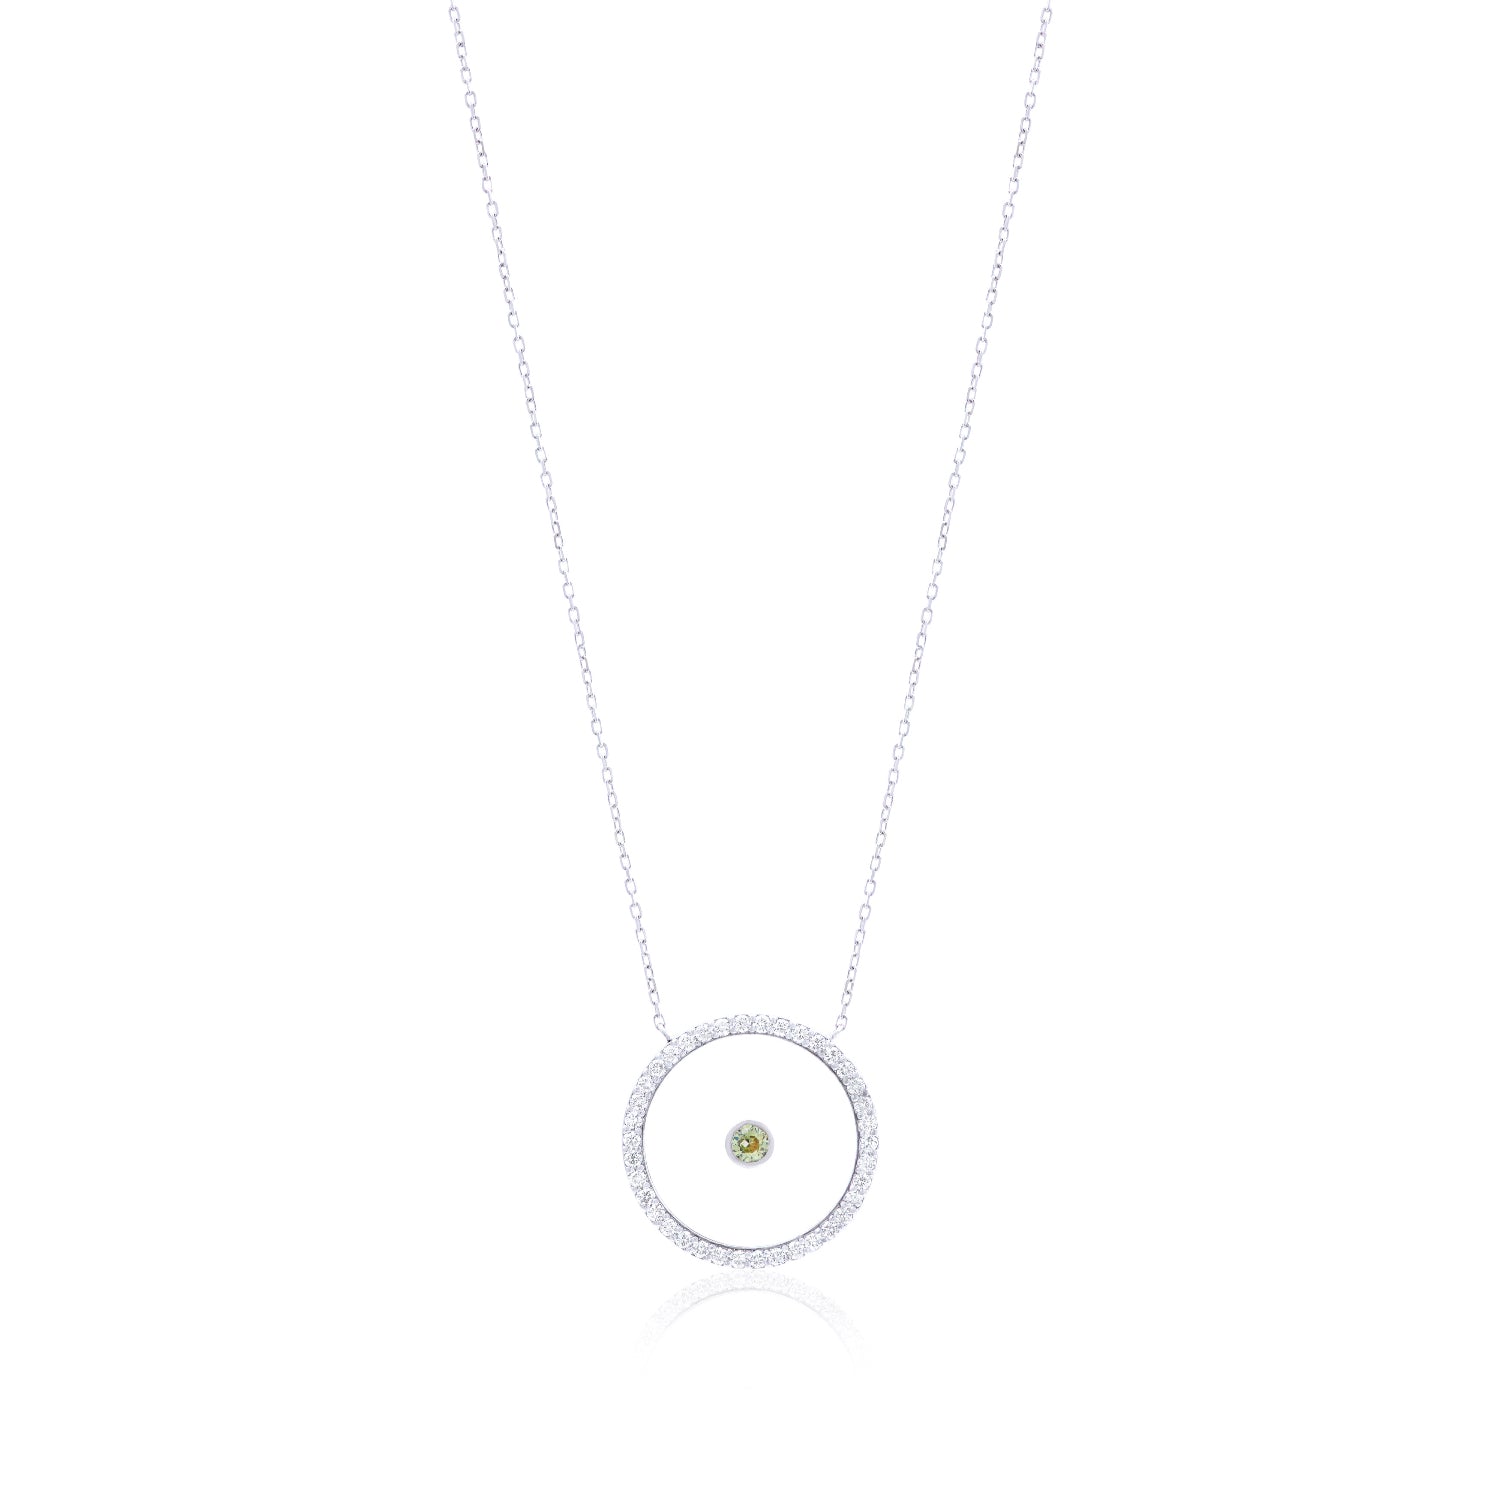 Peridot August Birthstone Necklace in White Gold